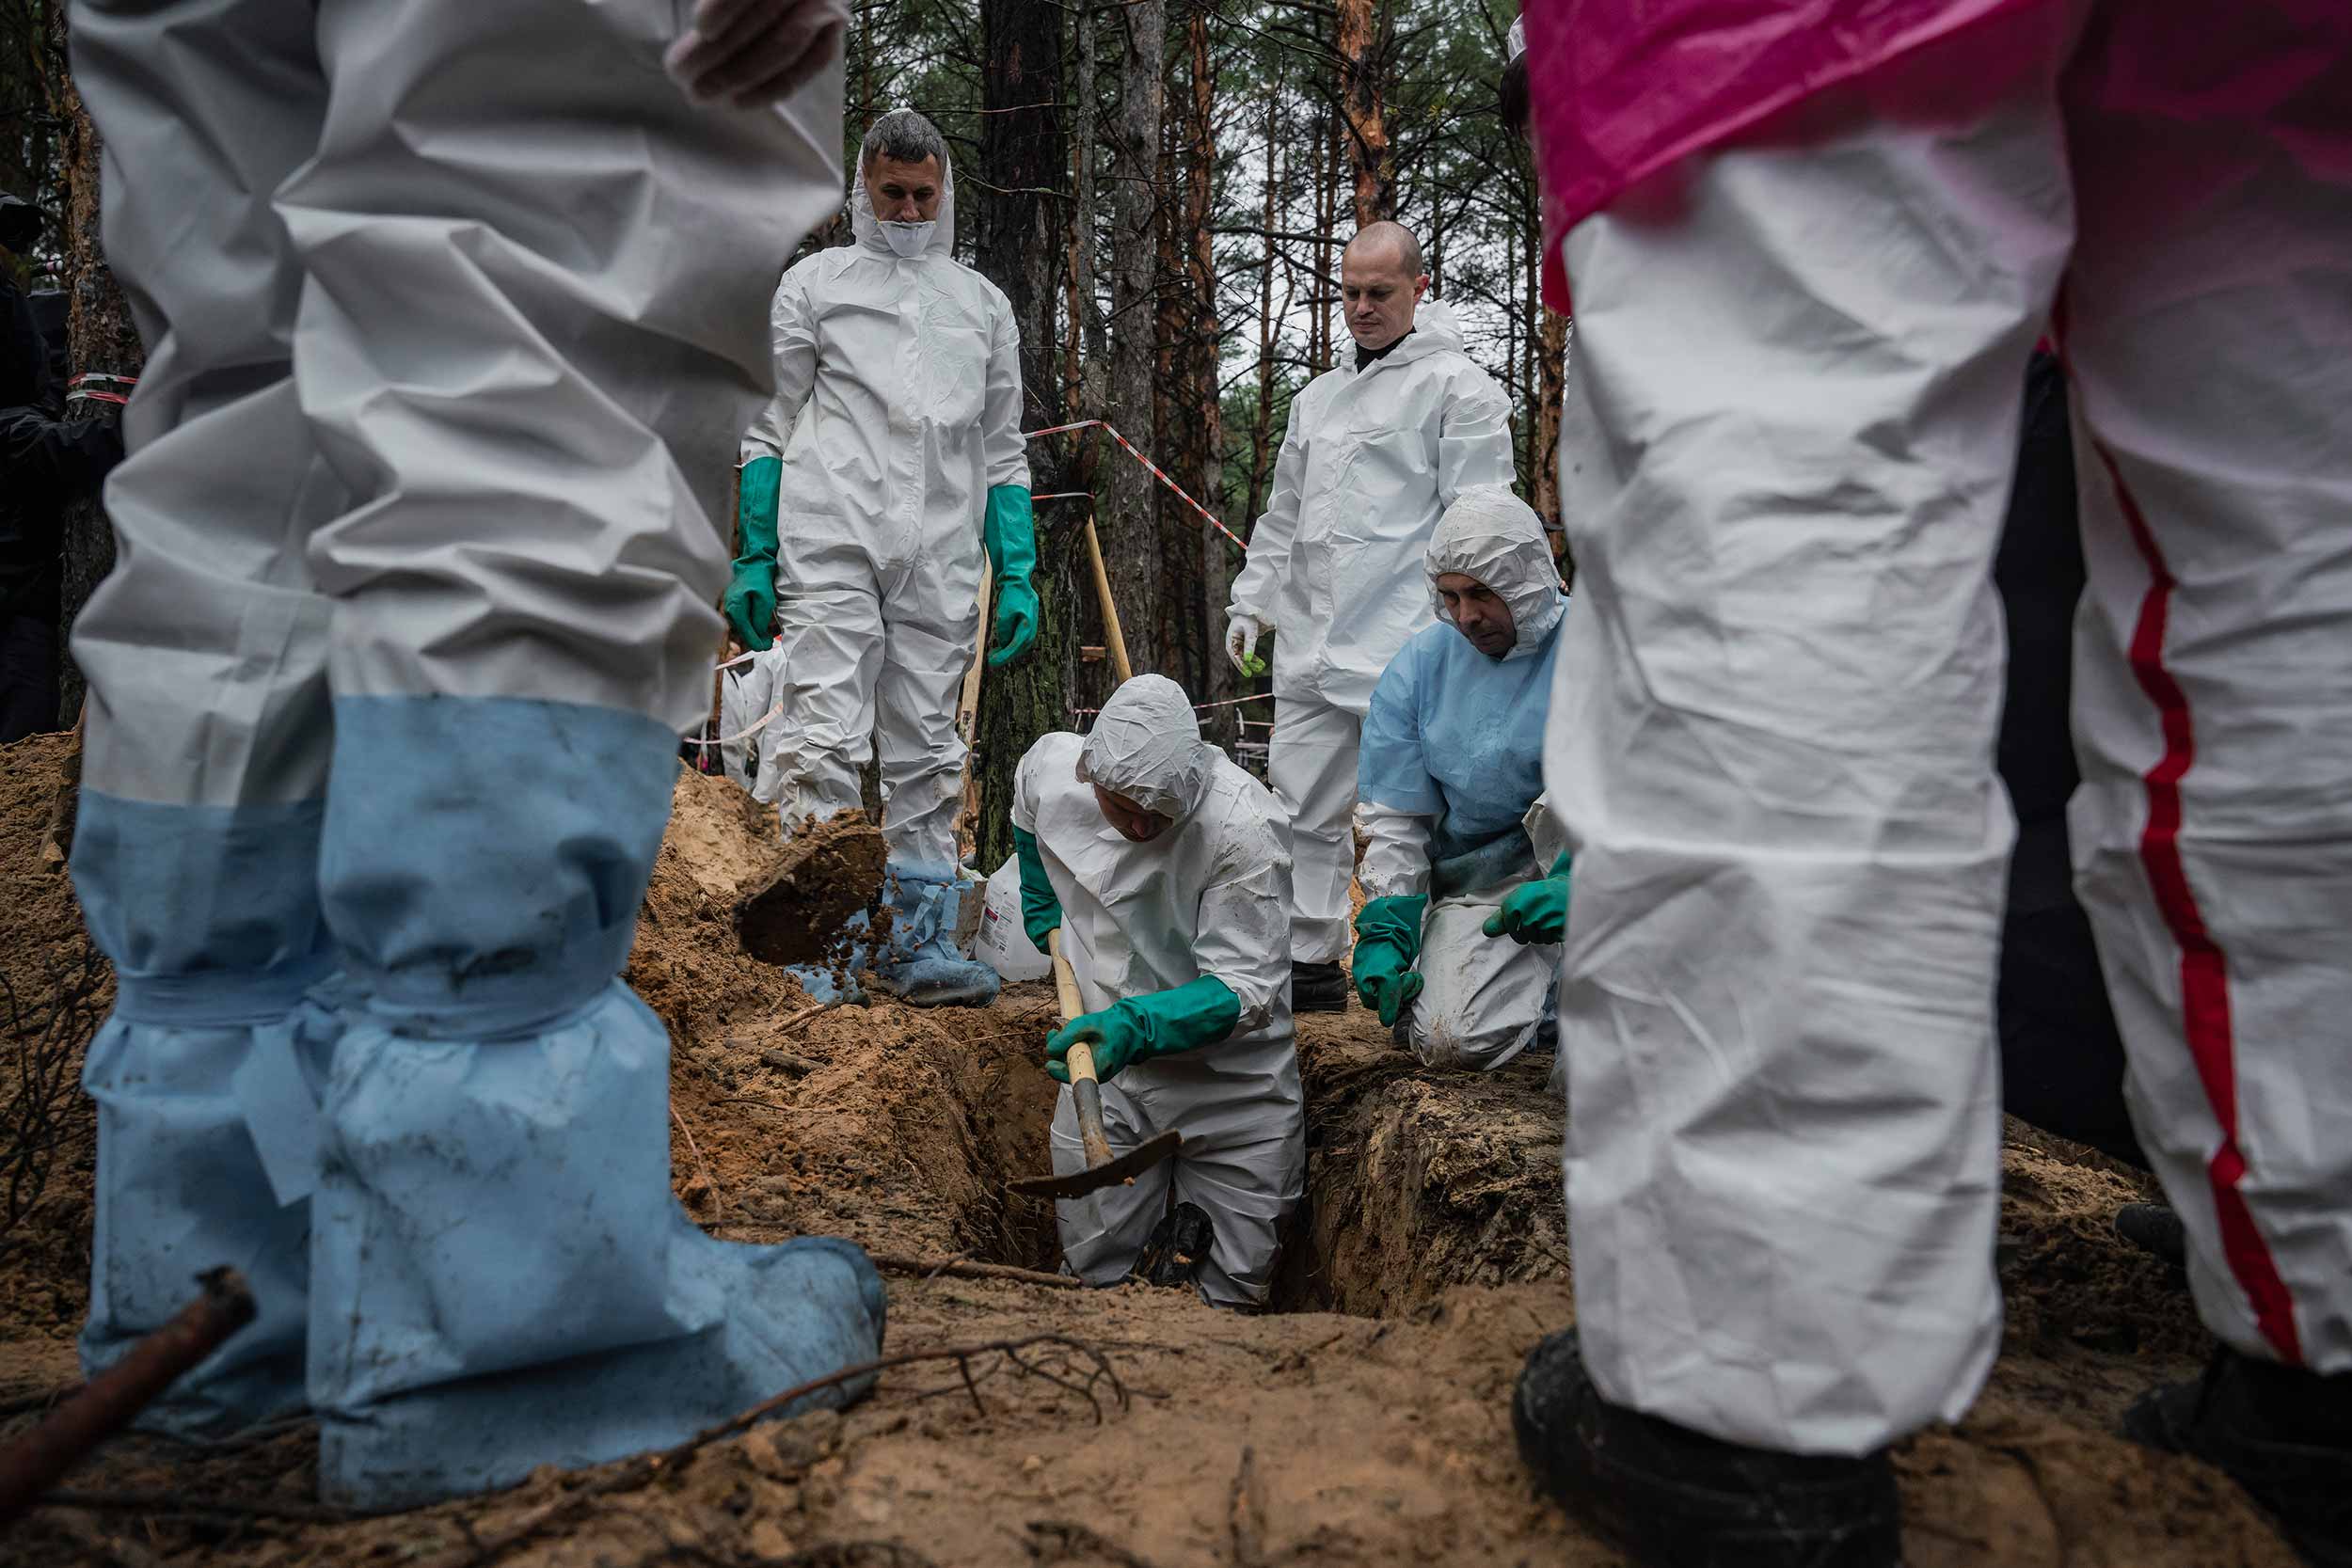 Protected by head-to-toe suits and rubber gloves, workers recover the remains of the victims. They carefully collect and classify all possible objects, which could help to identify those buried in unmarked graves. © Danil Pavlov